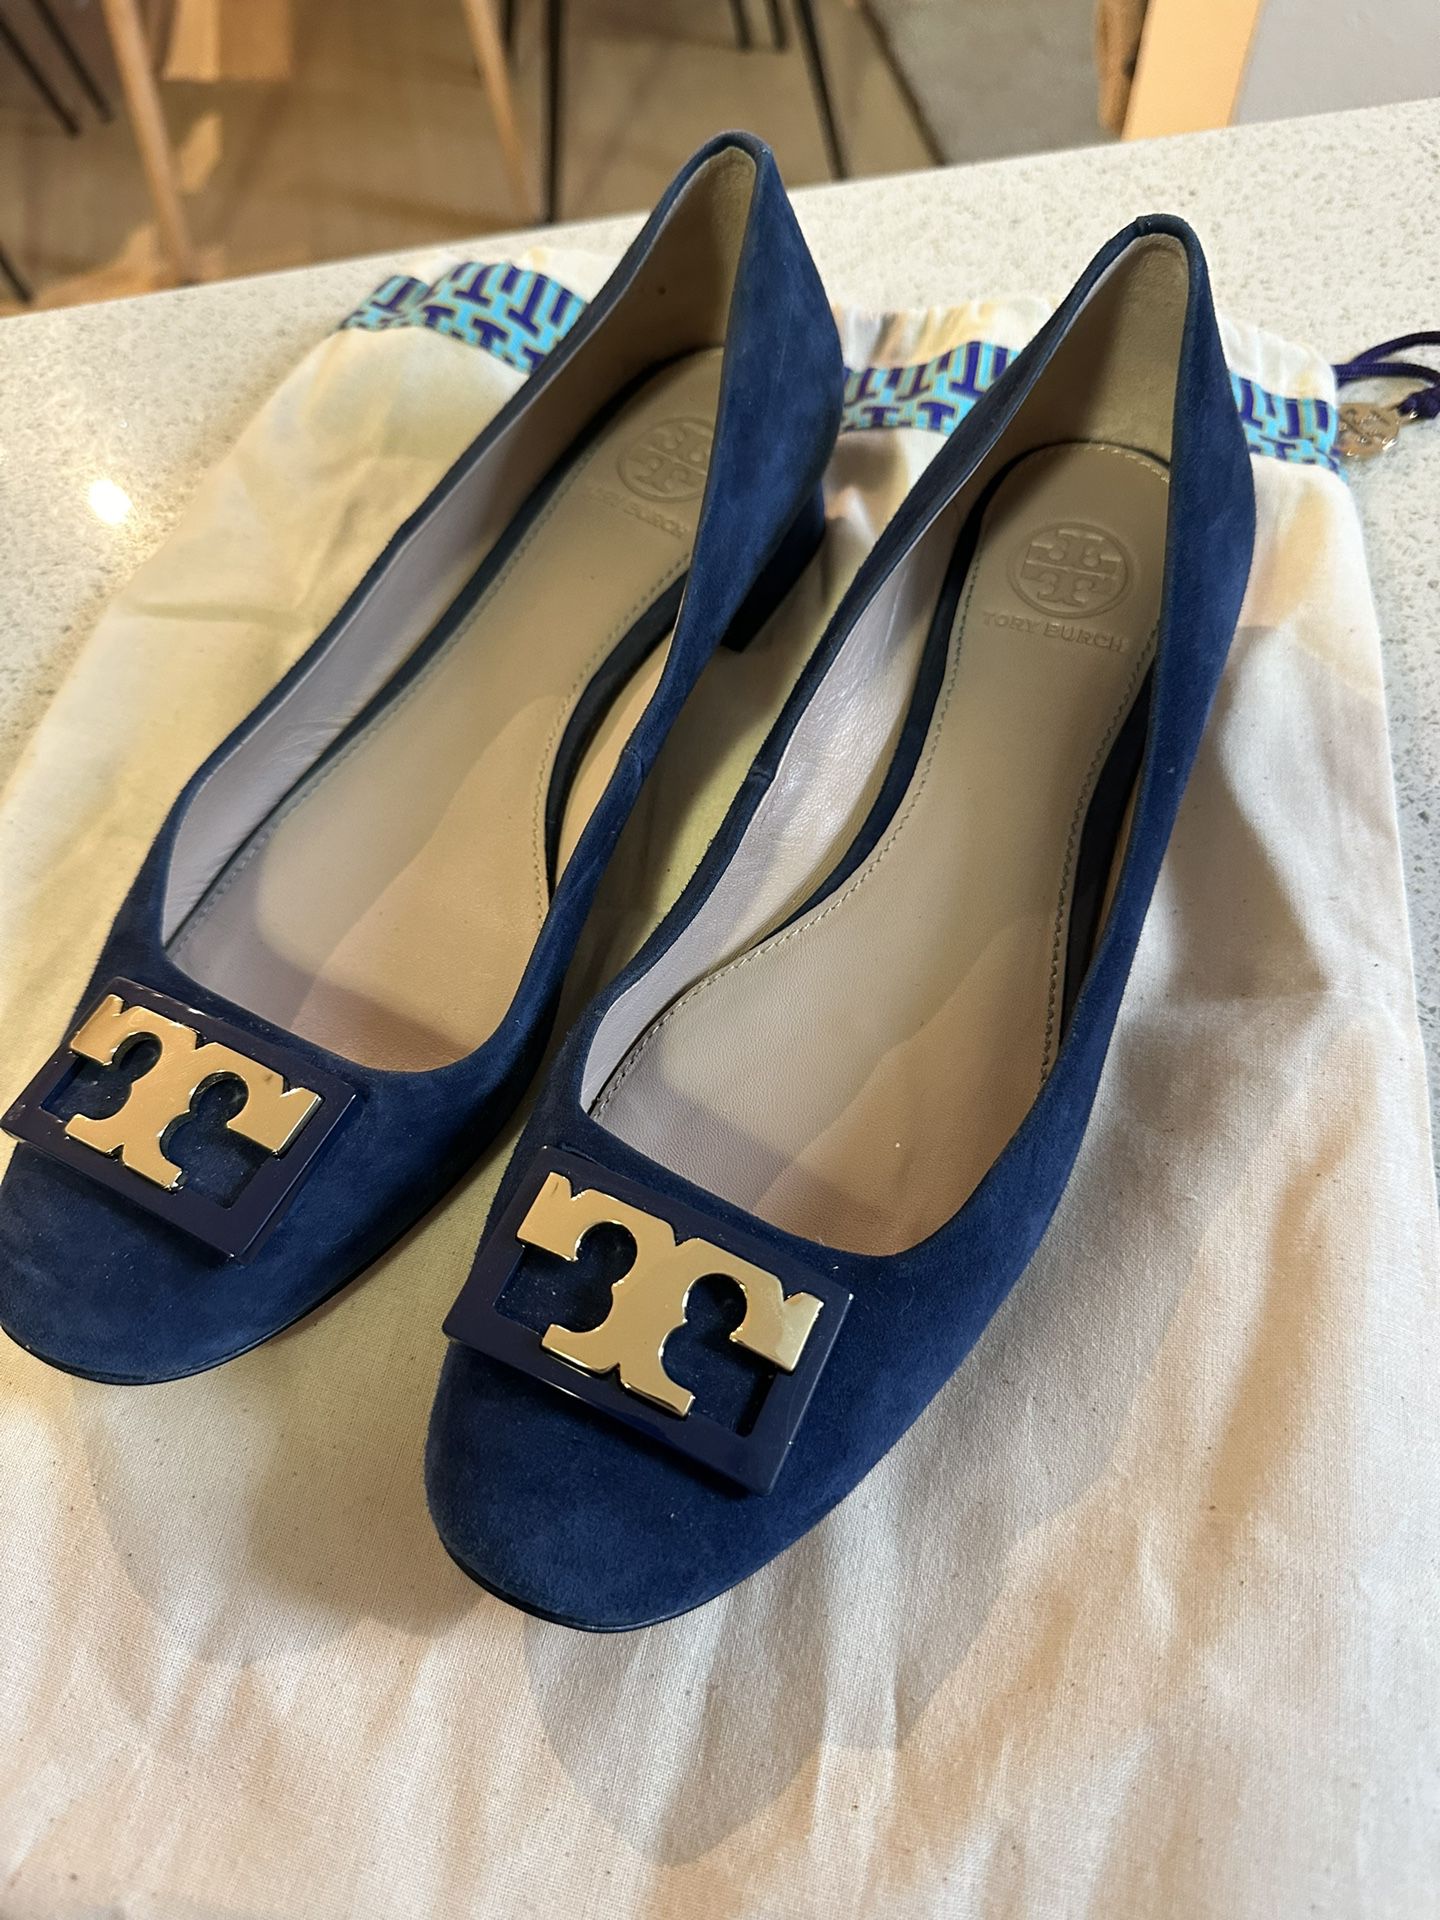 Tory Burch Shoes Size 8 - 9 for Sale in Pasadena, CA - OfferUp